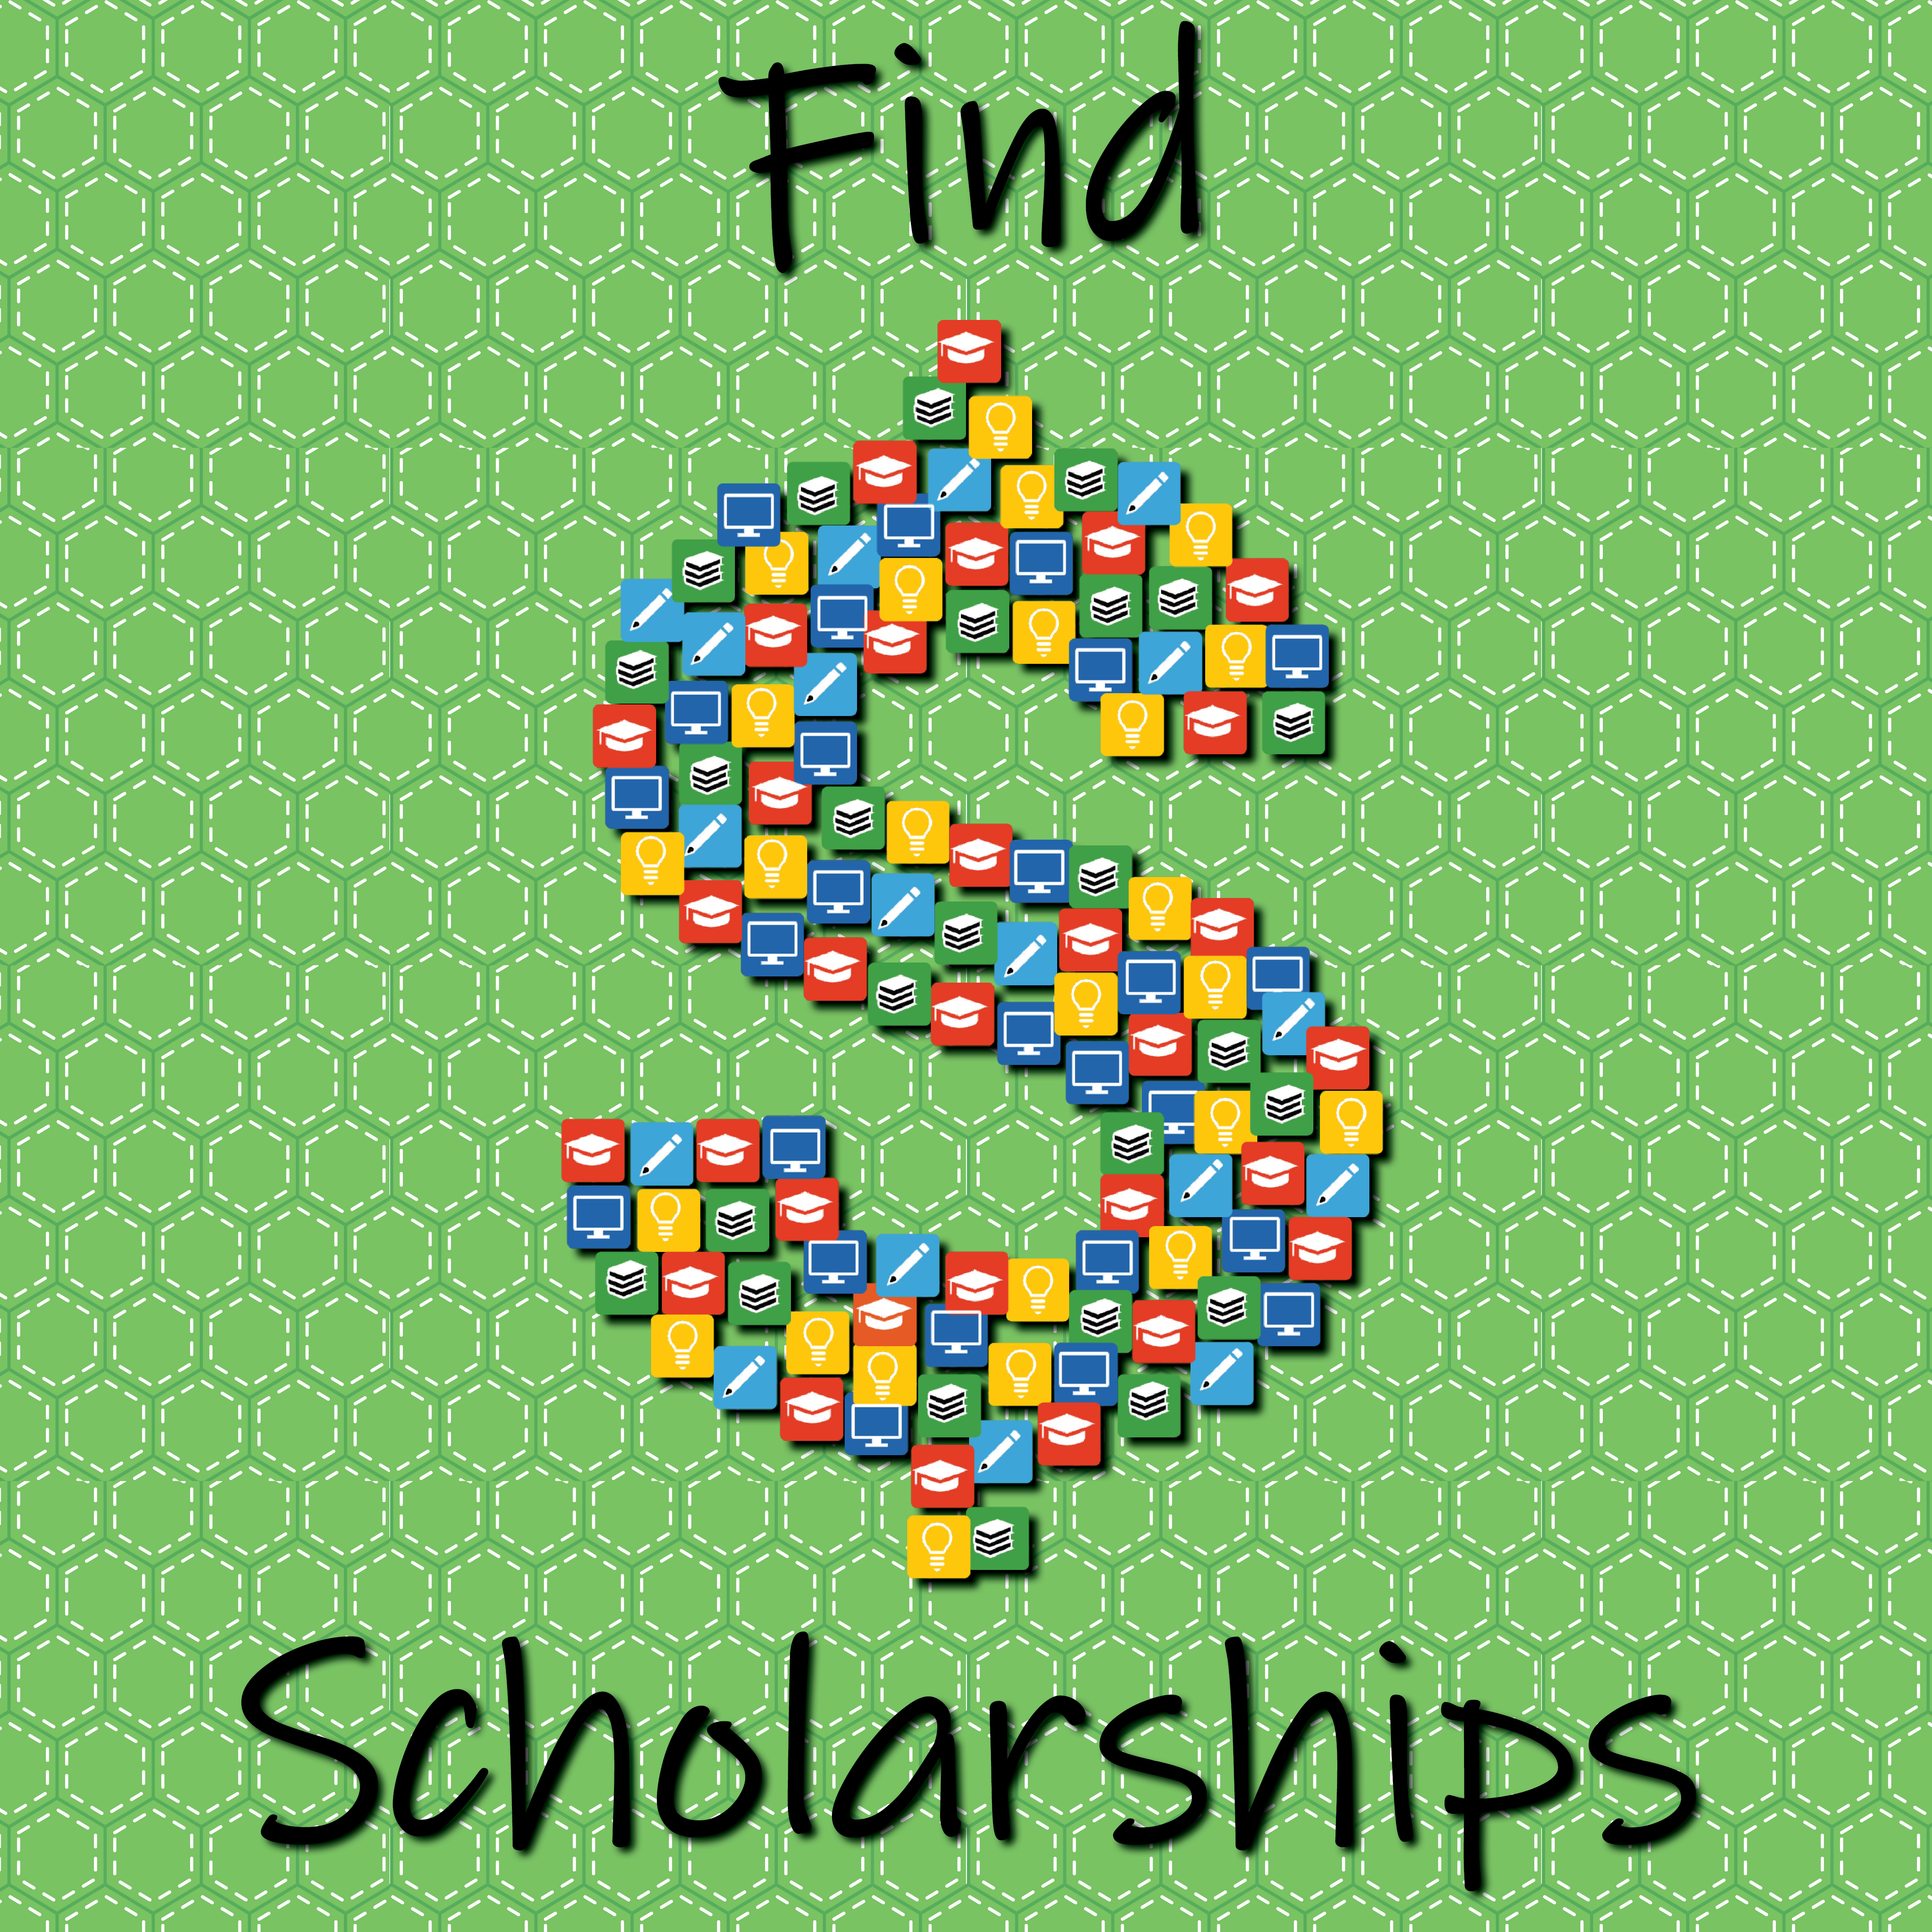 Find Scholarships button